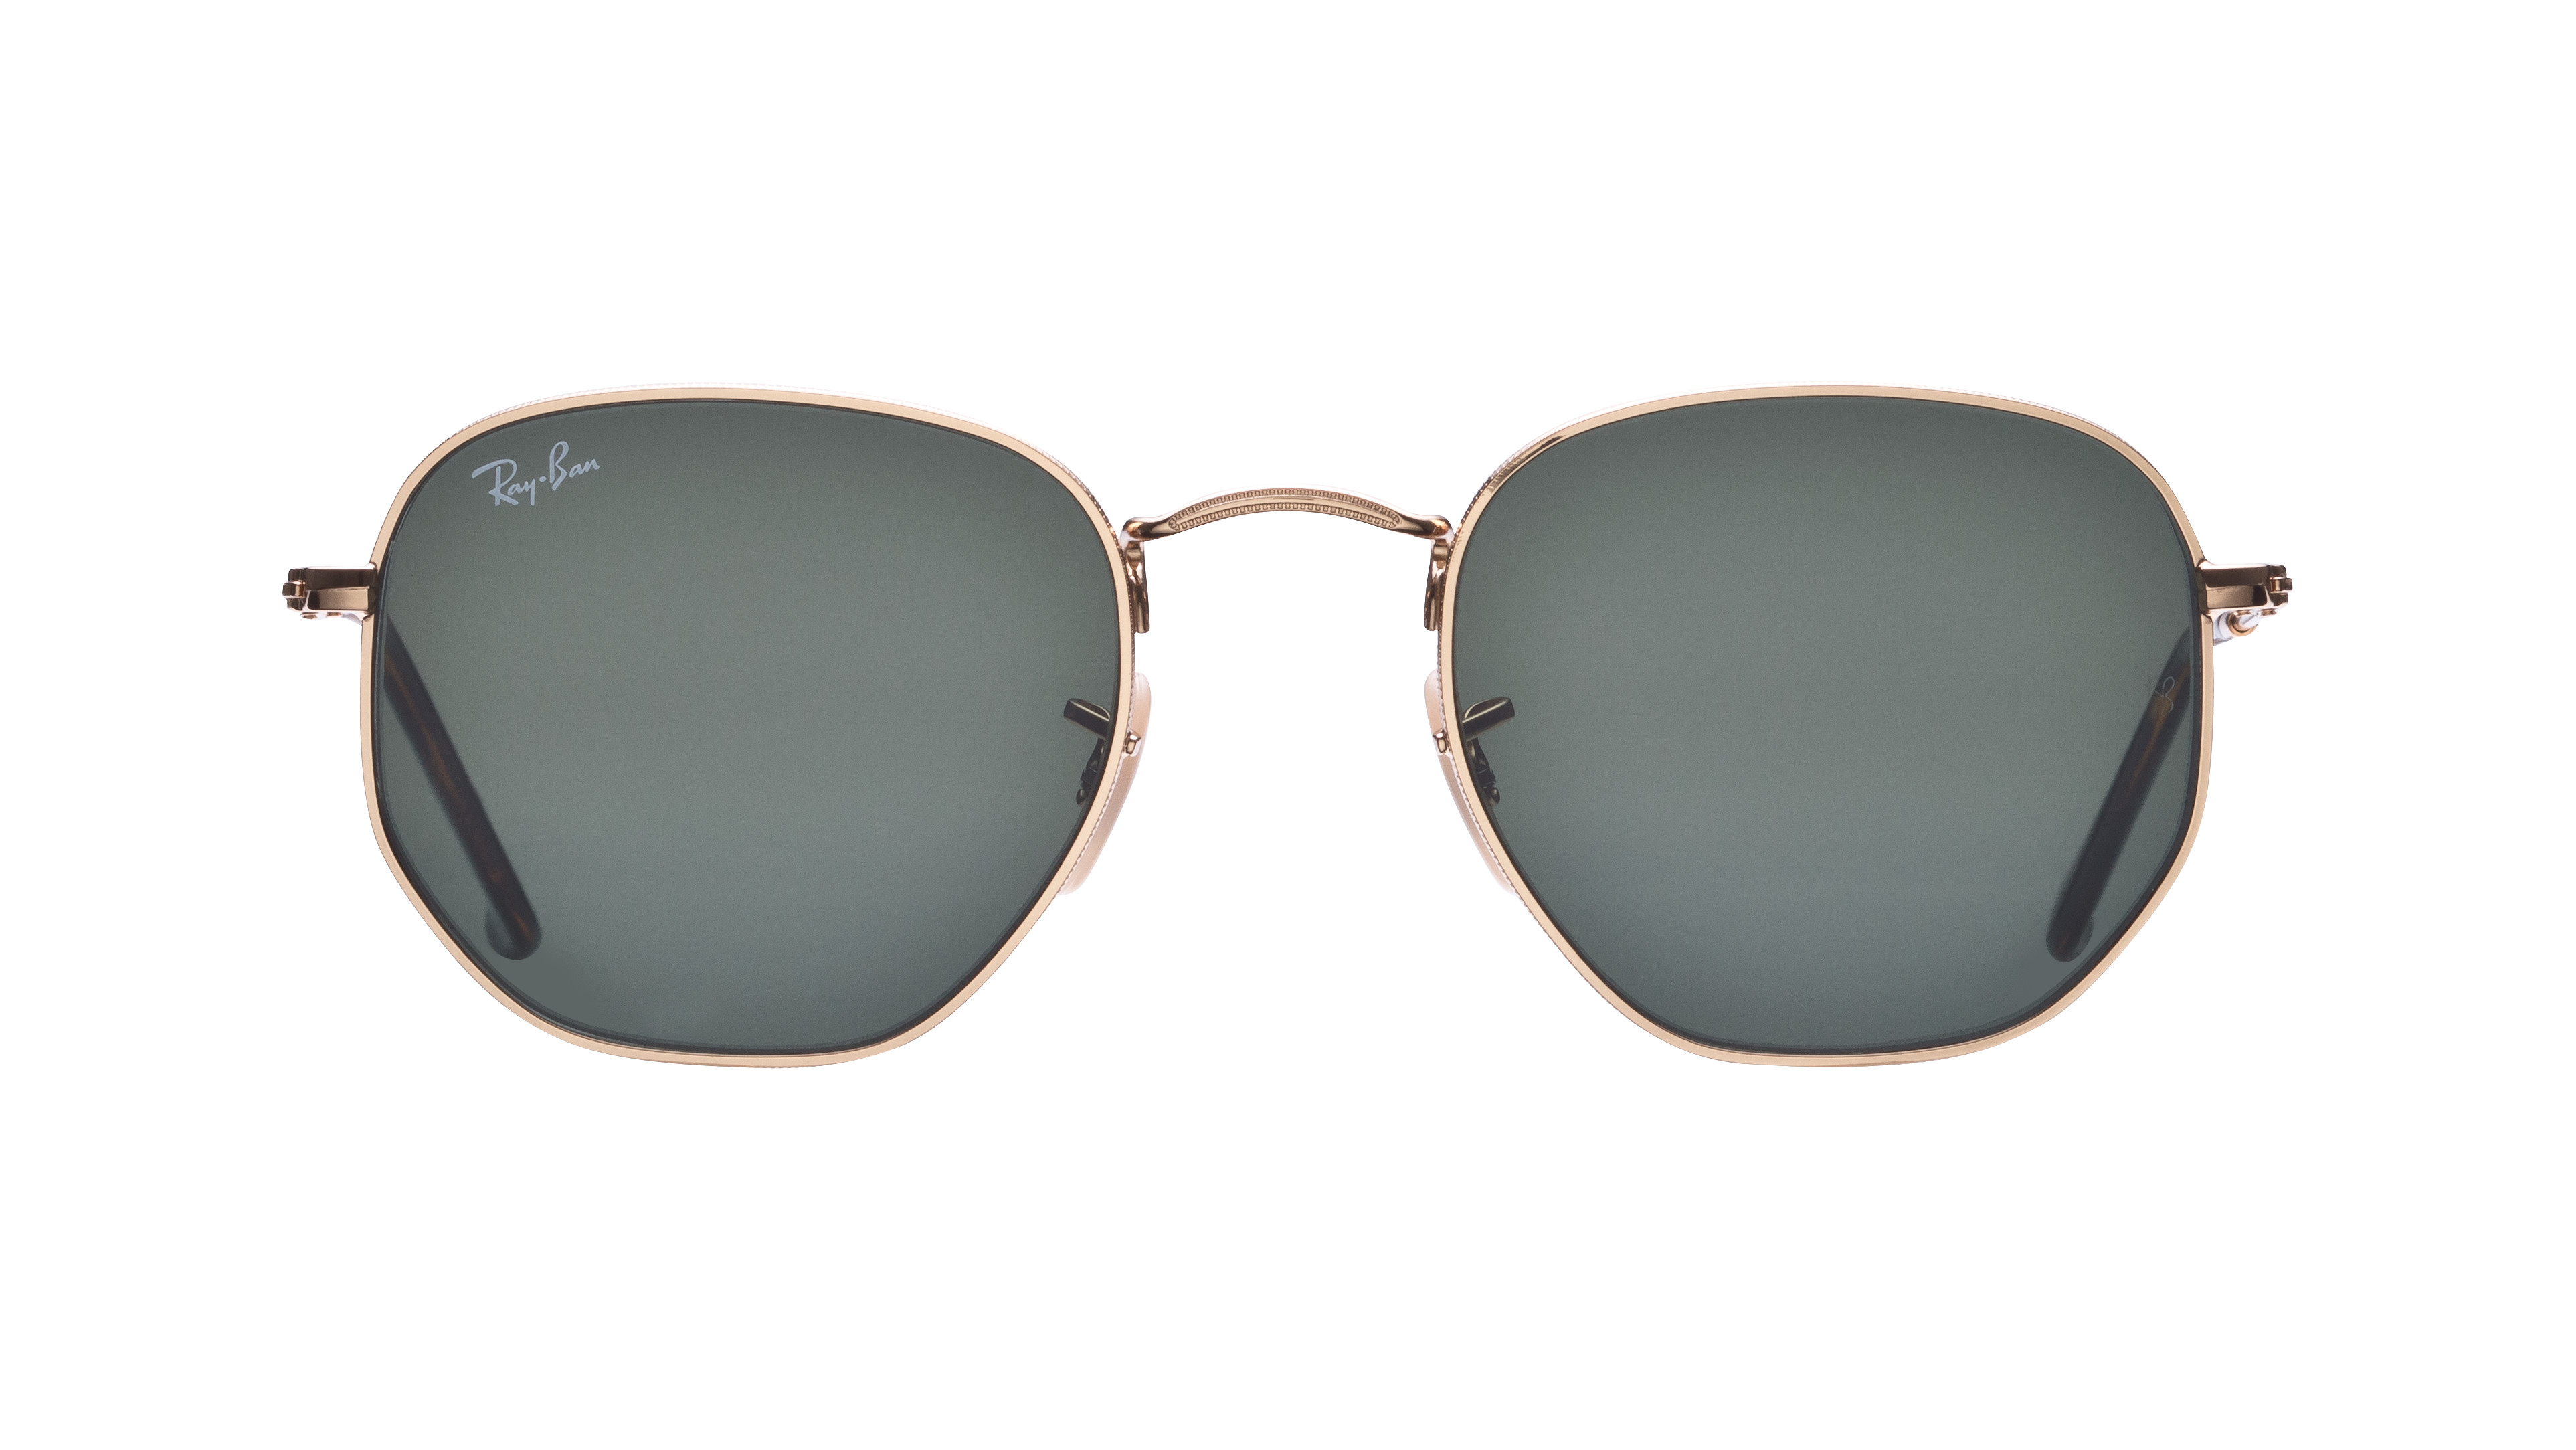 [products.image.front] Ray-Ban HEXAGONAL 0RB3548N 001 Sonnenbrille